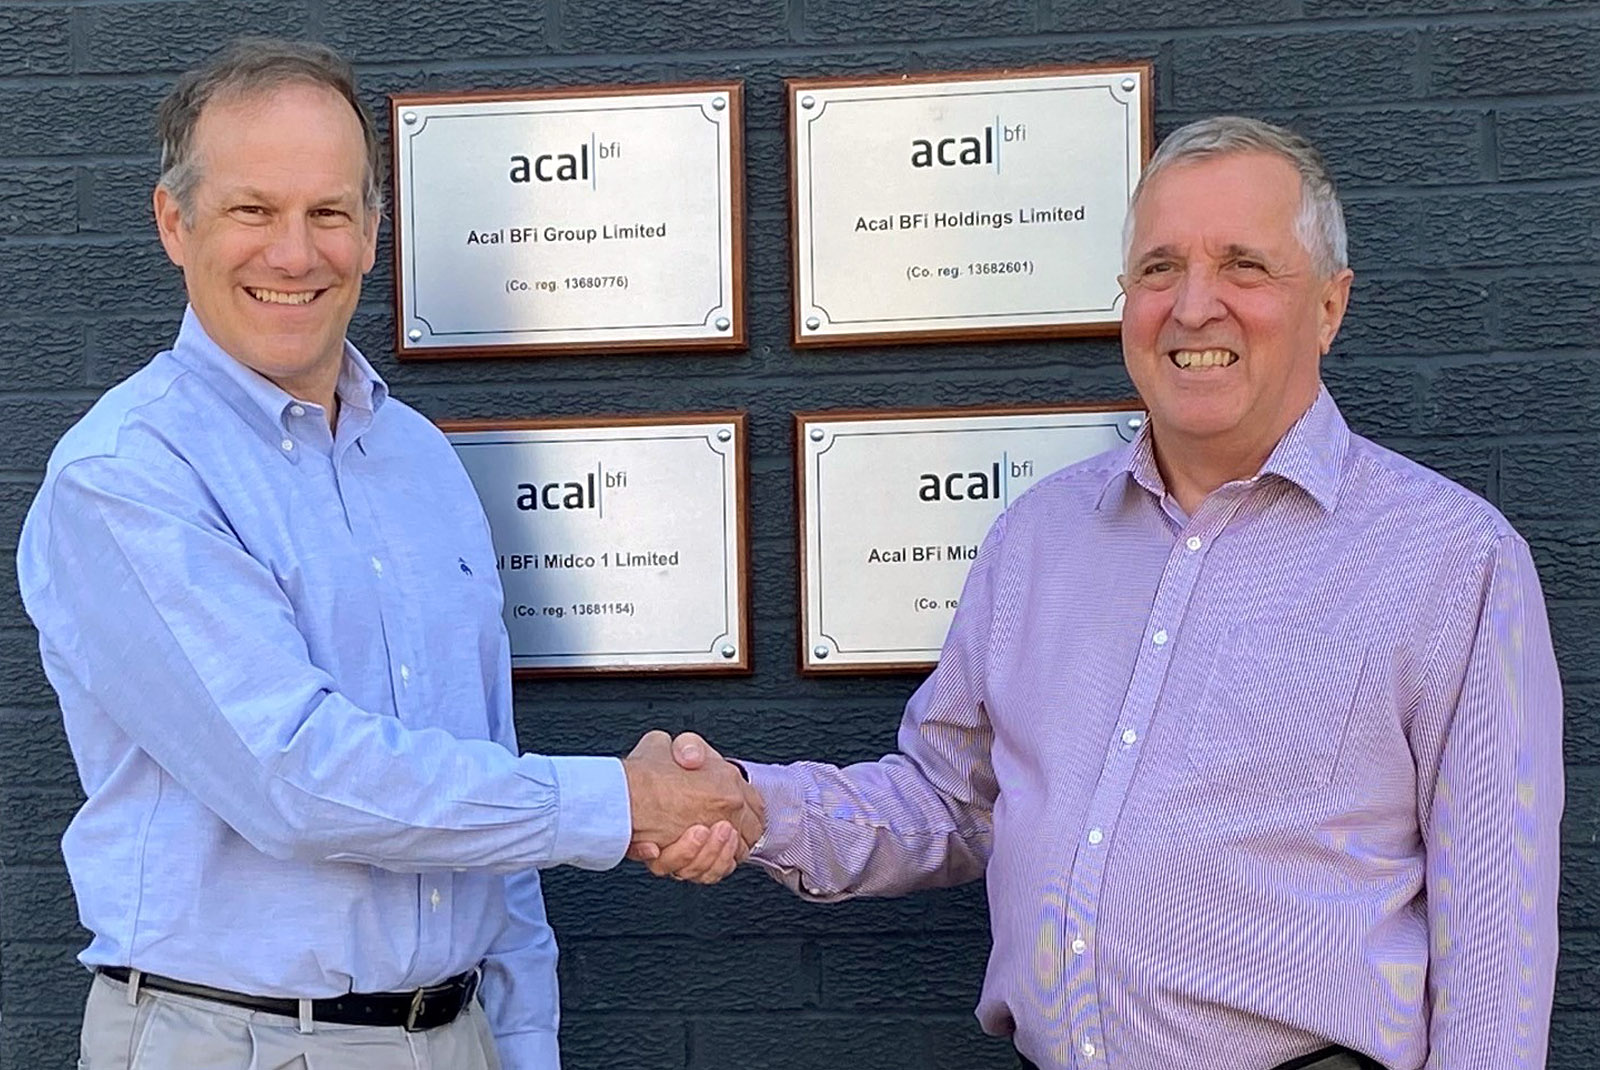 Acal BFi - Videology signs a new agreement for new Pan-European distributor